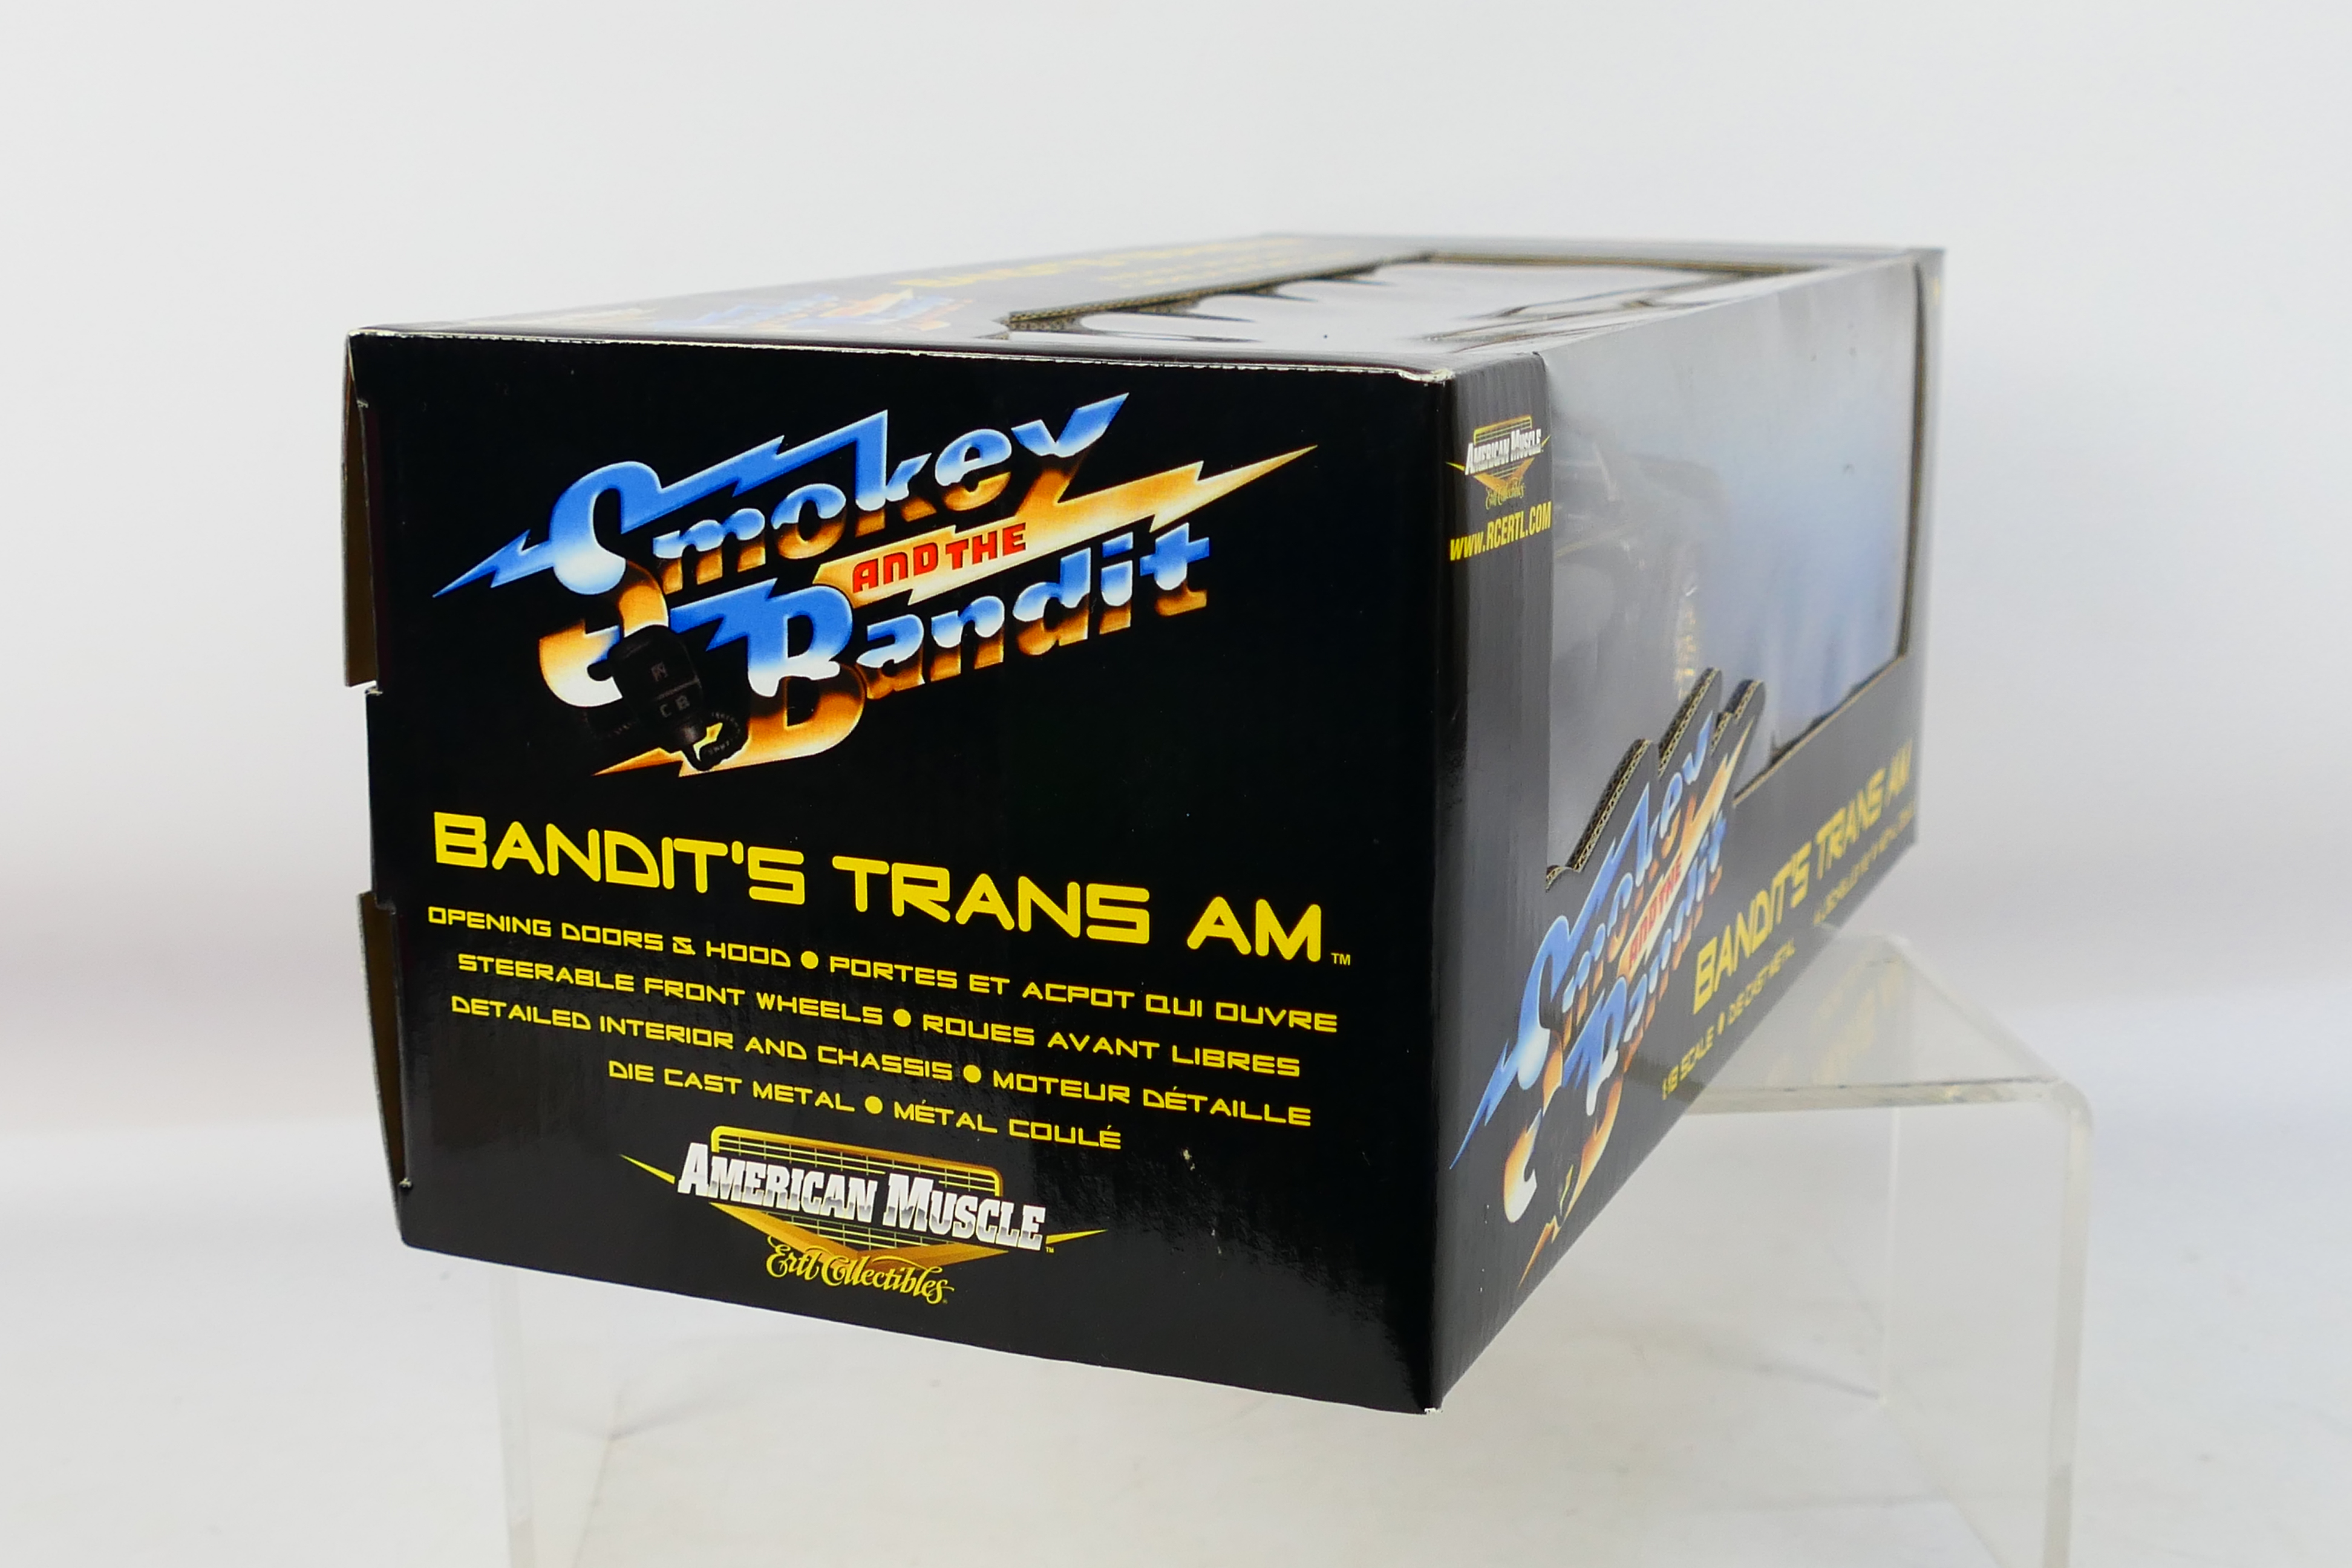 Ertl - A boxed 1:18 scale Ertl 'American Muscle' #33131 'Smokey and The Bandit' Bandit's Trans Am. - Image 4 of 5